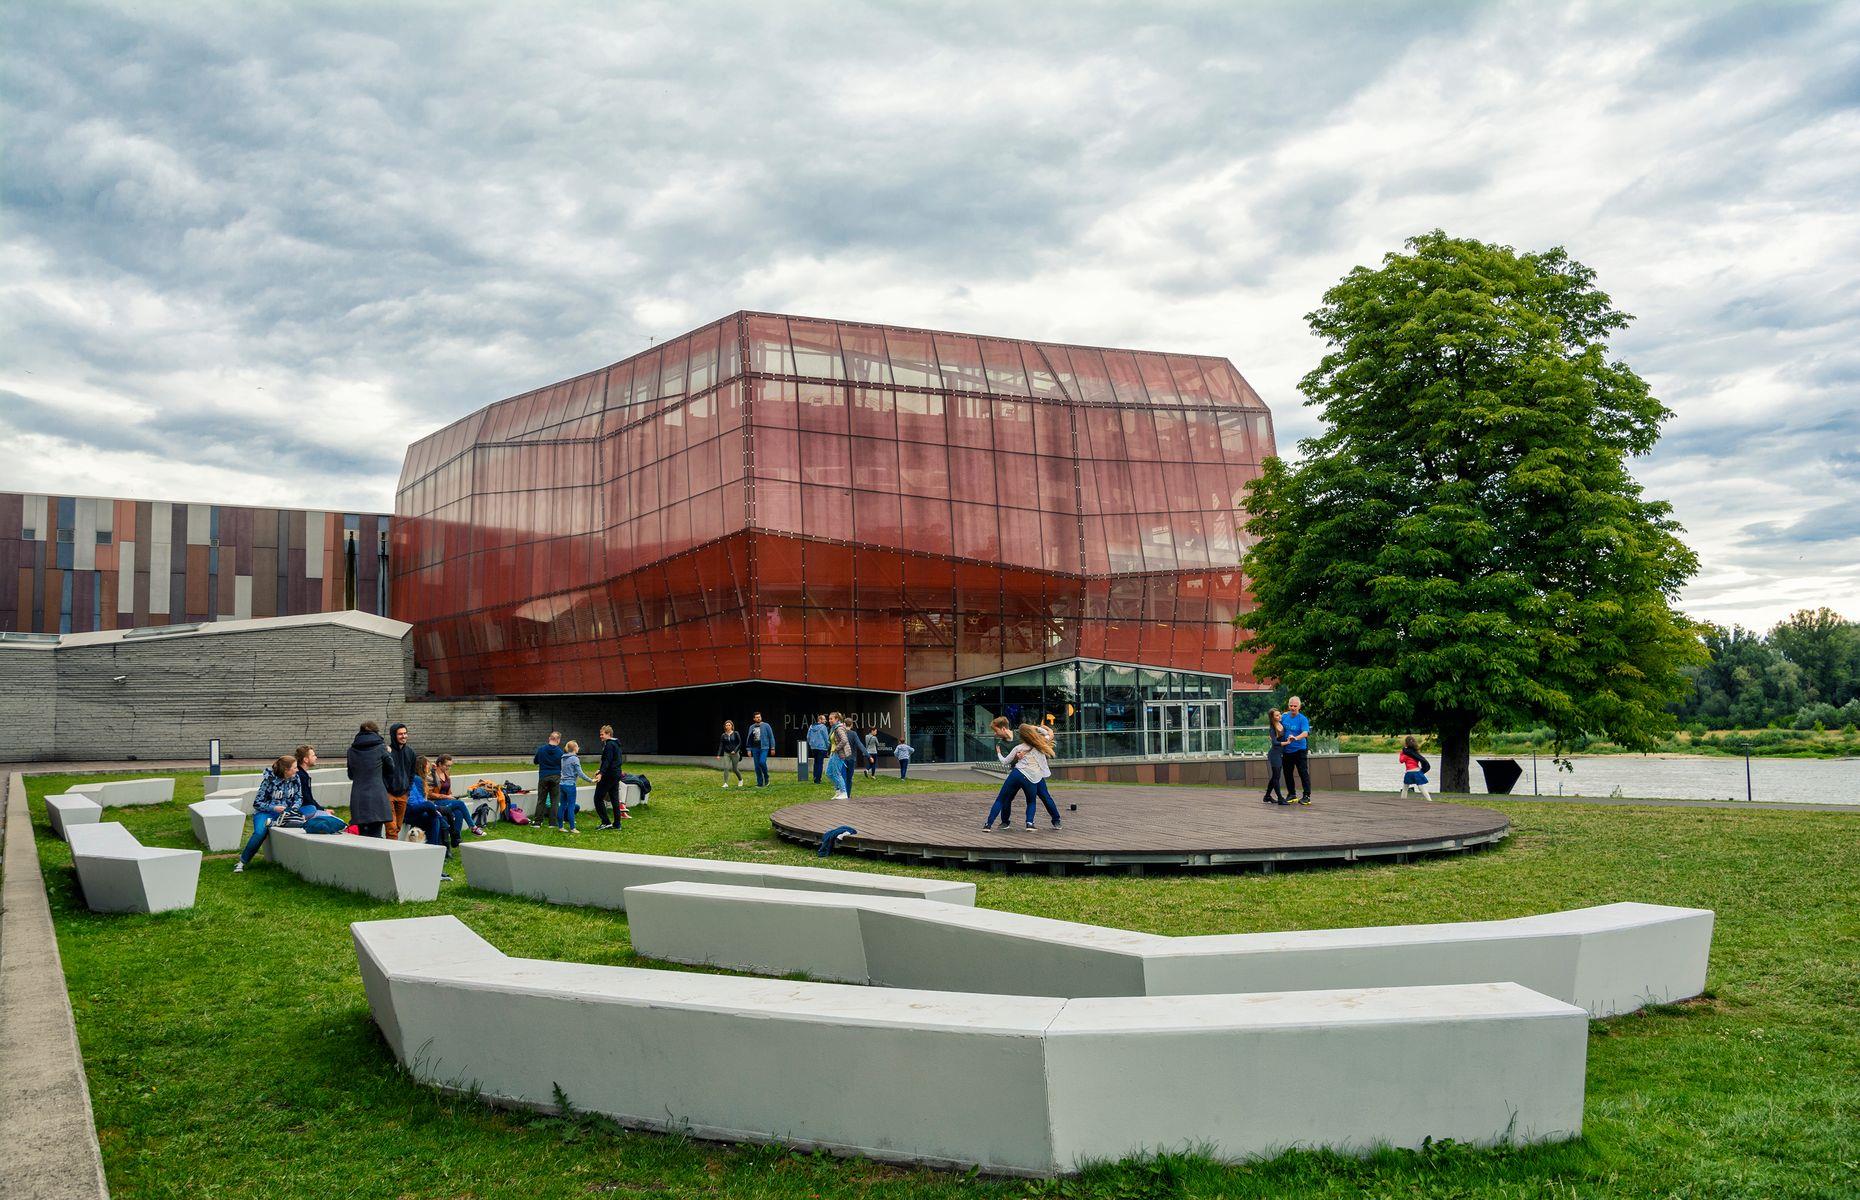 <p>The solar system is usually one of the coolest topics at school, so where better to take the kids than a planetarium? Warsaw’s <a href="https://www.kopernik.org.pl/en">Planetarium at the Copernicus Science Centre</a> is one of the most modern planetariums in Europe and screens both 2D and 3D films in English, taking kids of all ages on a tour of the solar system, the International Space Station and outer space. Want to get a bit more involved? There are 400 fascinating exhibitions and interactive displays inside the wider science centre.</p>  <p><a href="https://www.facebook.com/loveexploringUK?utm_source=msn&utm_medium=social&utm_campaign=front"><strong>Love this? Follow us on Facebook for more travel inspiration</strong></a></p>